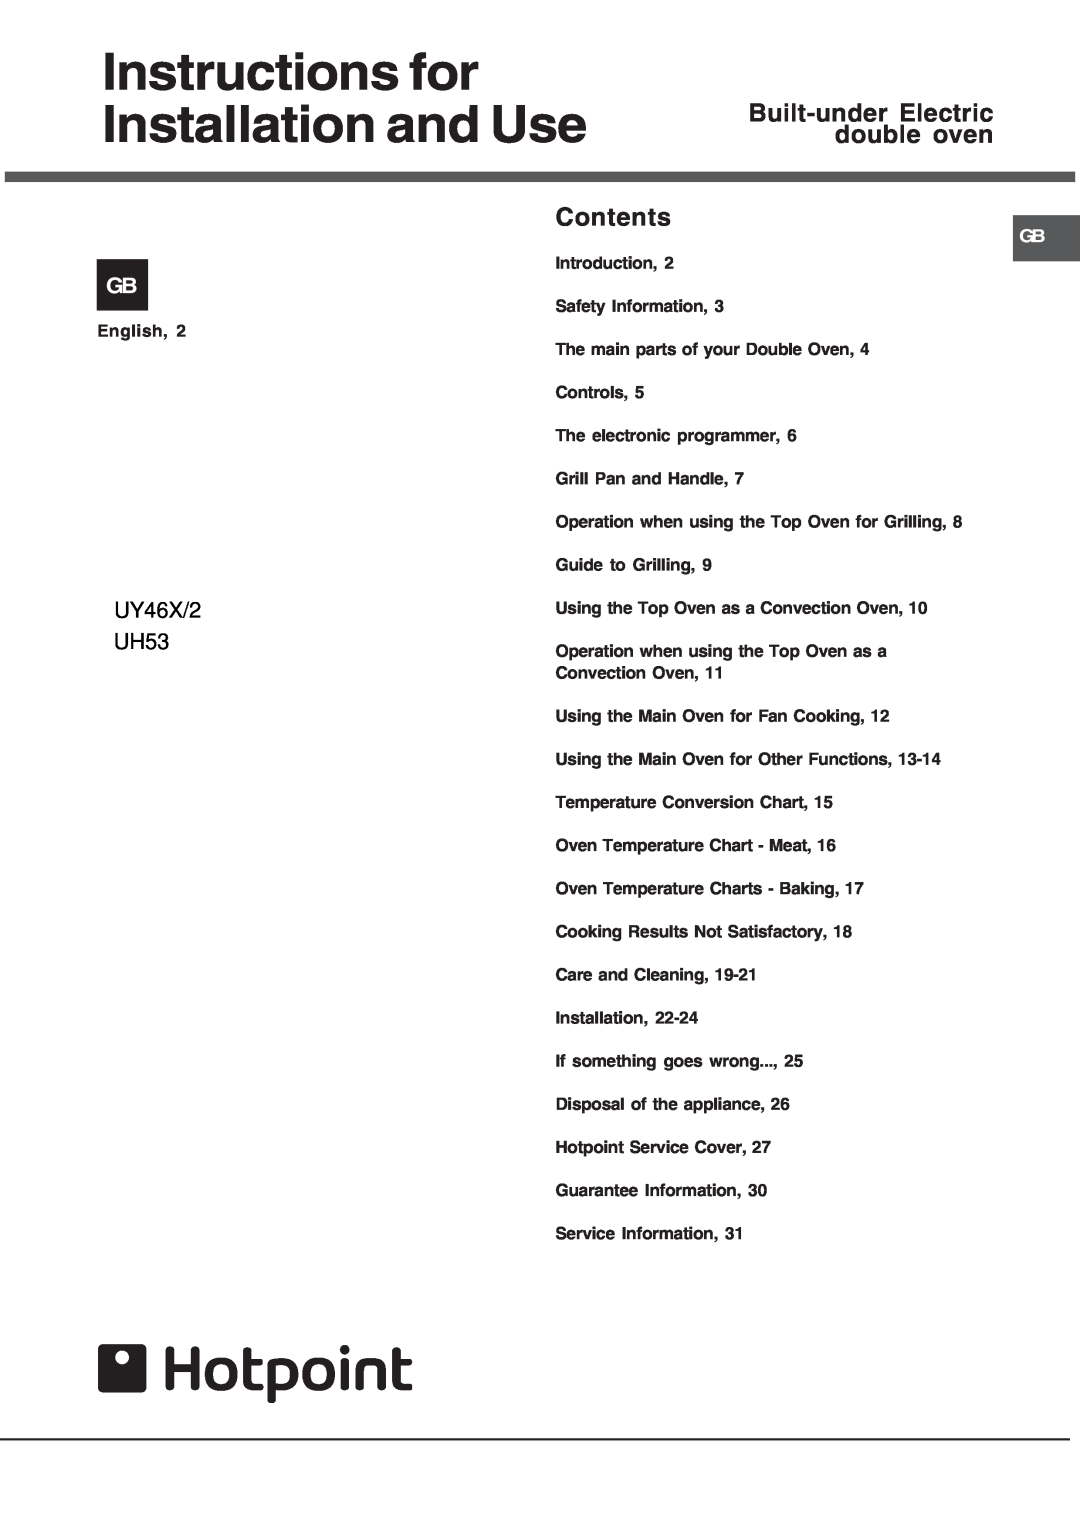 Hotpoint UY46X/2 UH53 manual Instructions for Installation and Use, Built-under Electric double oven, Contents 